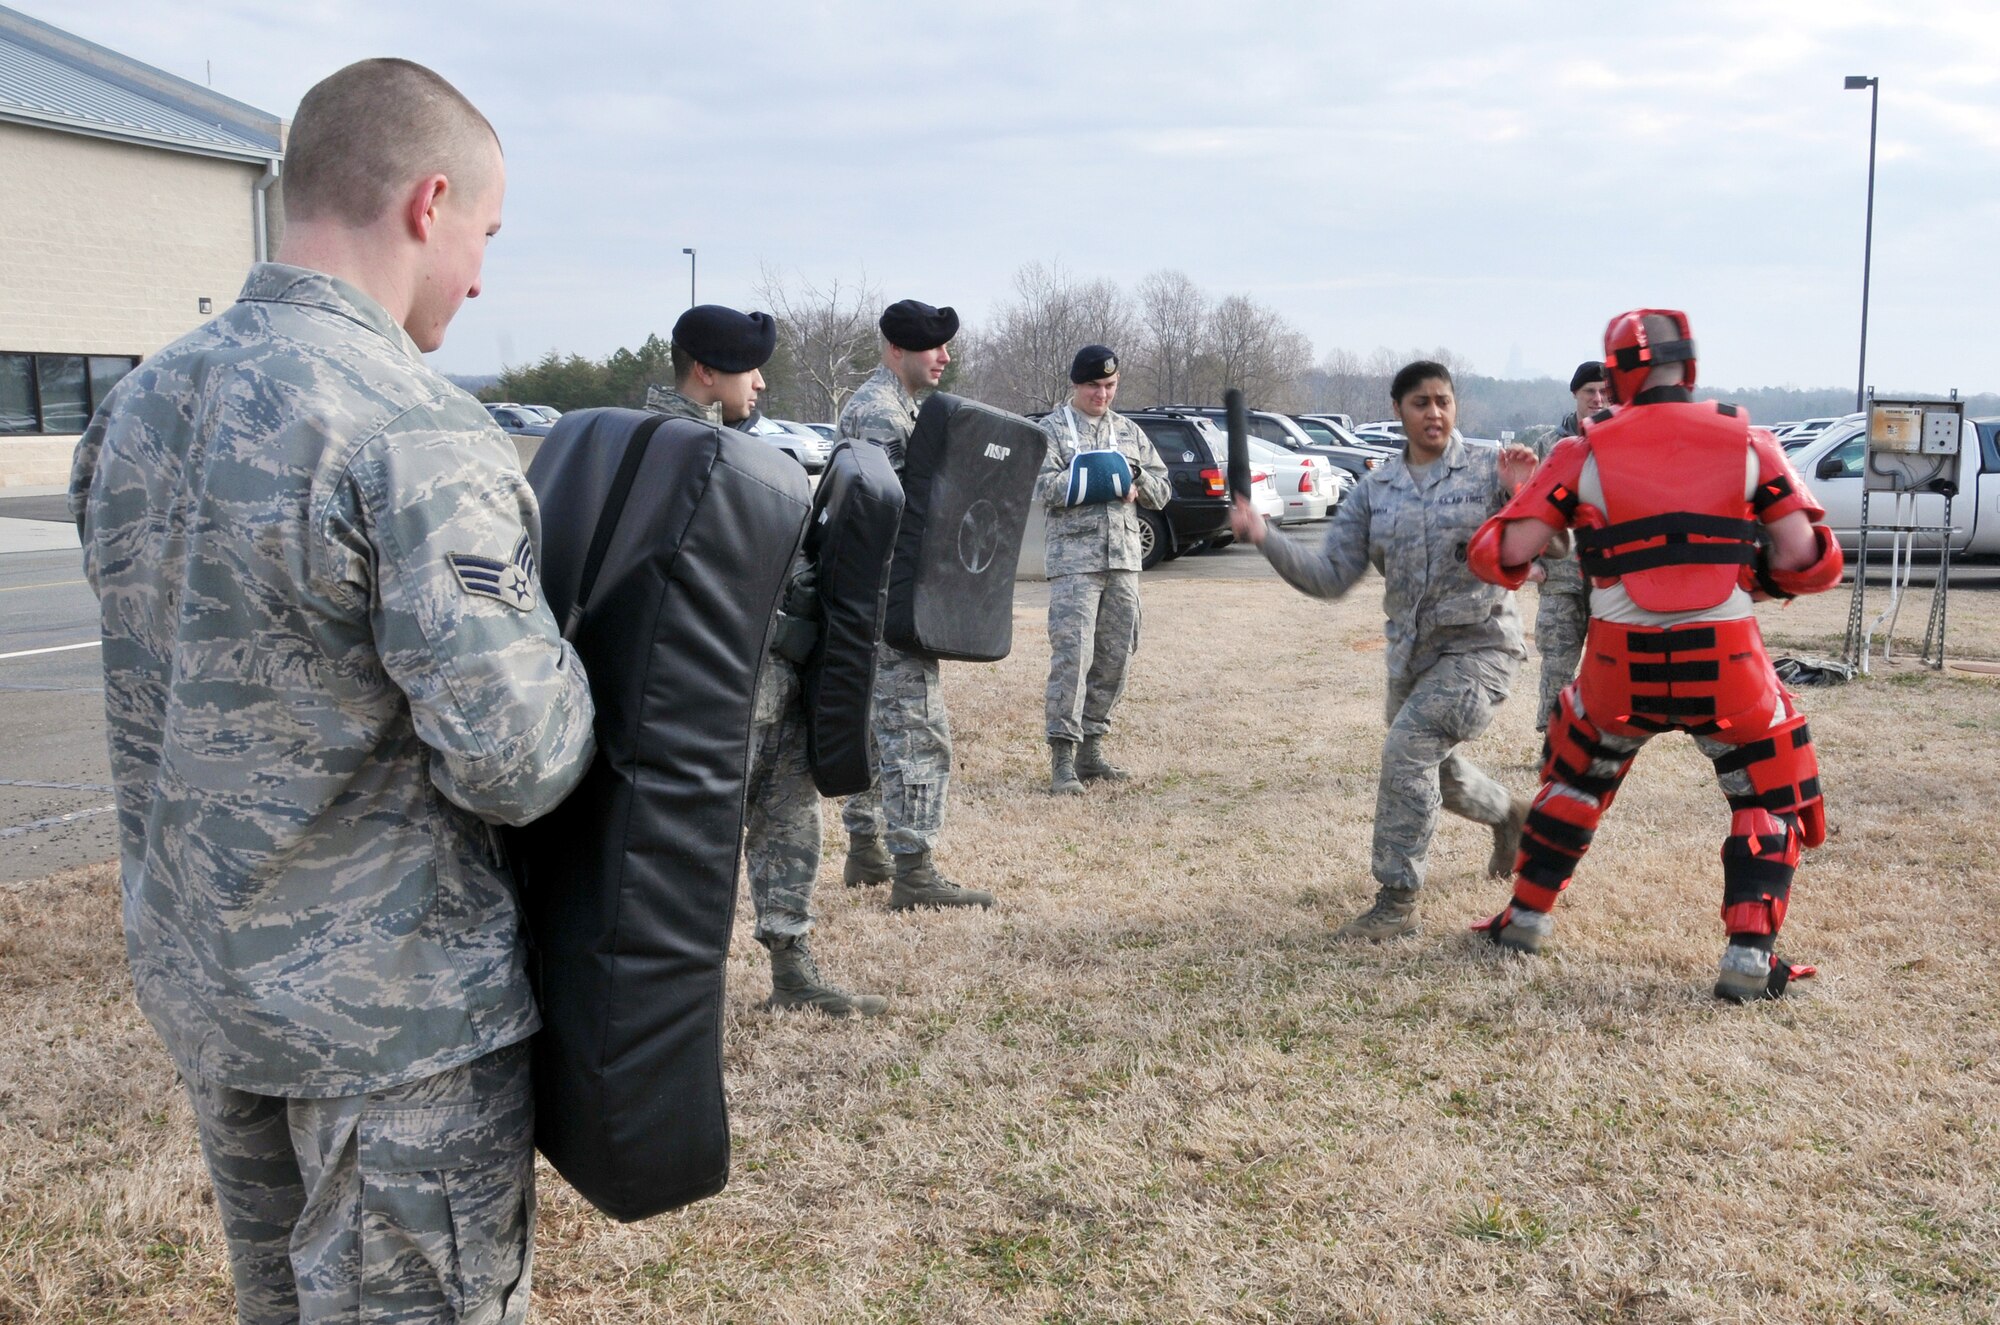 Members assigned to the 145th Security Forces Squadron, use ASP Baton Strike Pad and collapsible ASP batons during a training held at North Carolina Air National Guard base, Charlotte Douglas Intl. airport, February 9, 2014.  Security Forces must keep their certification in non-lethal ASP as part of their yearly requirements. (U.S. Air National Guard photo by Senior Airman Laura Montgomery, 145th Public Affairs/Released